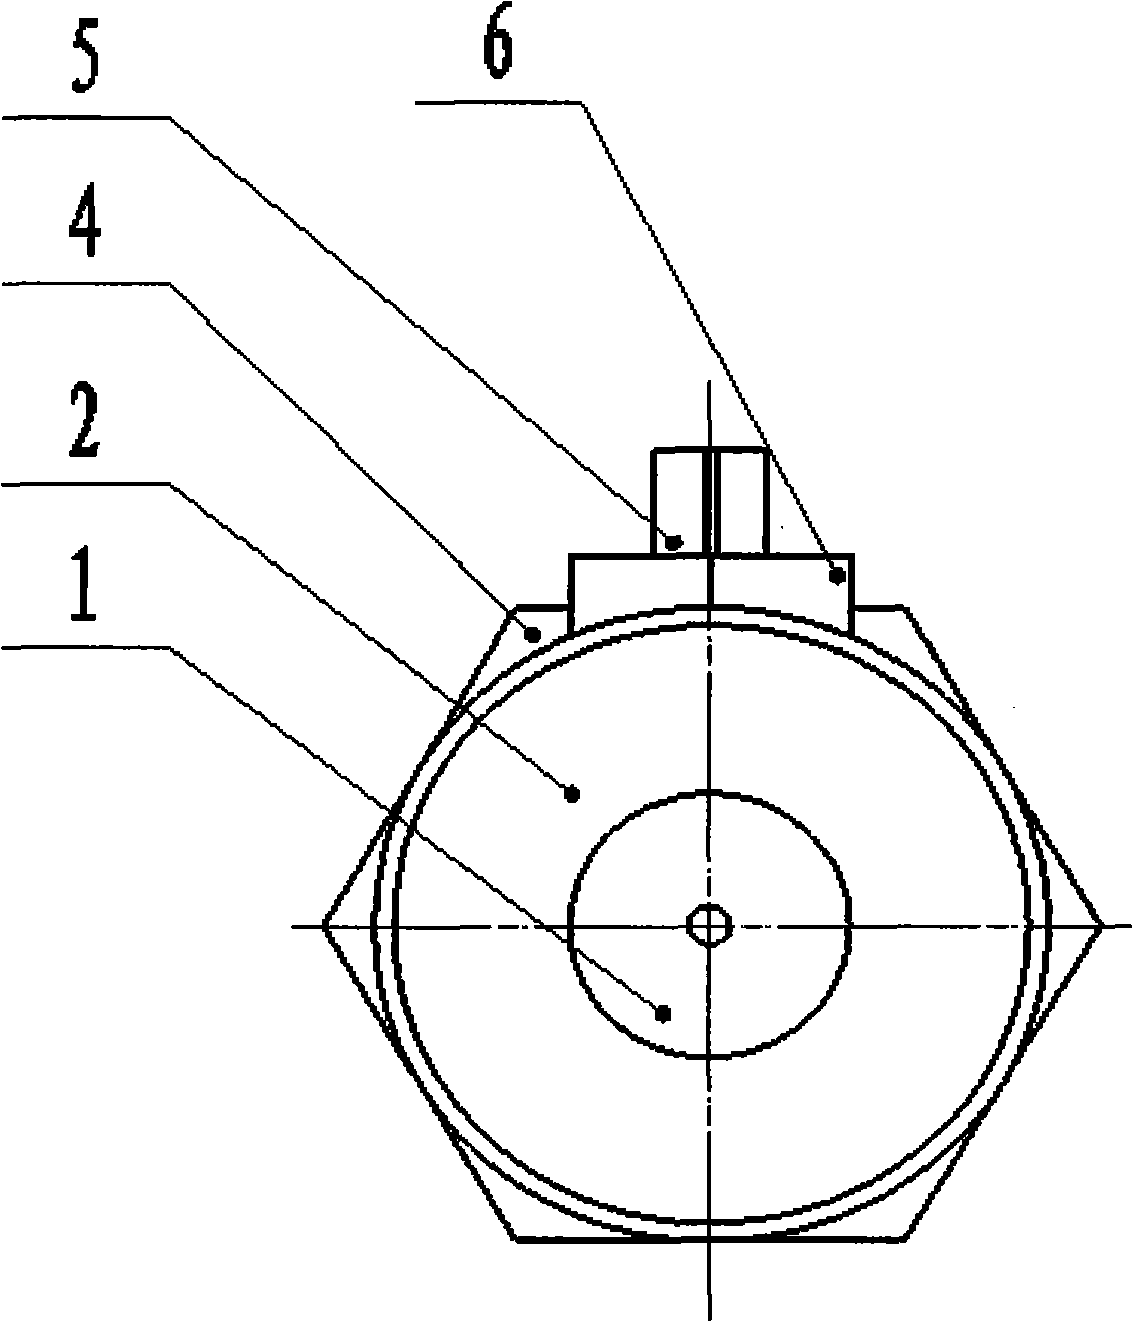 Spring nozzle for differential injection molding